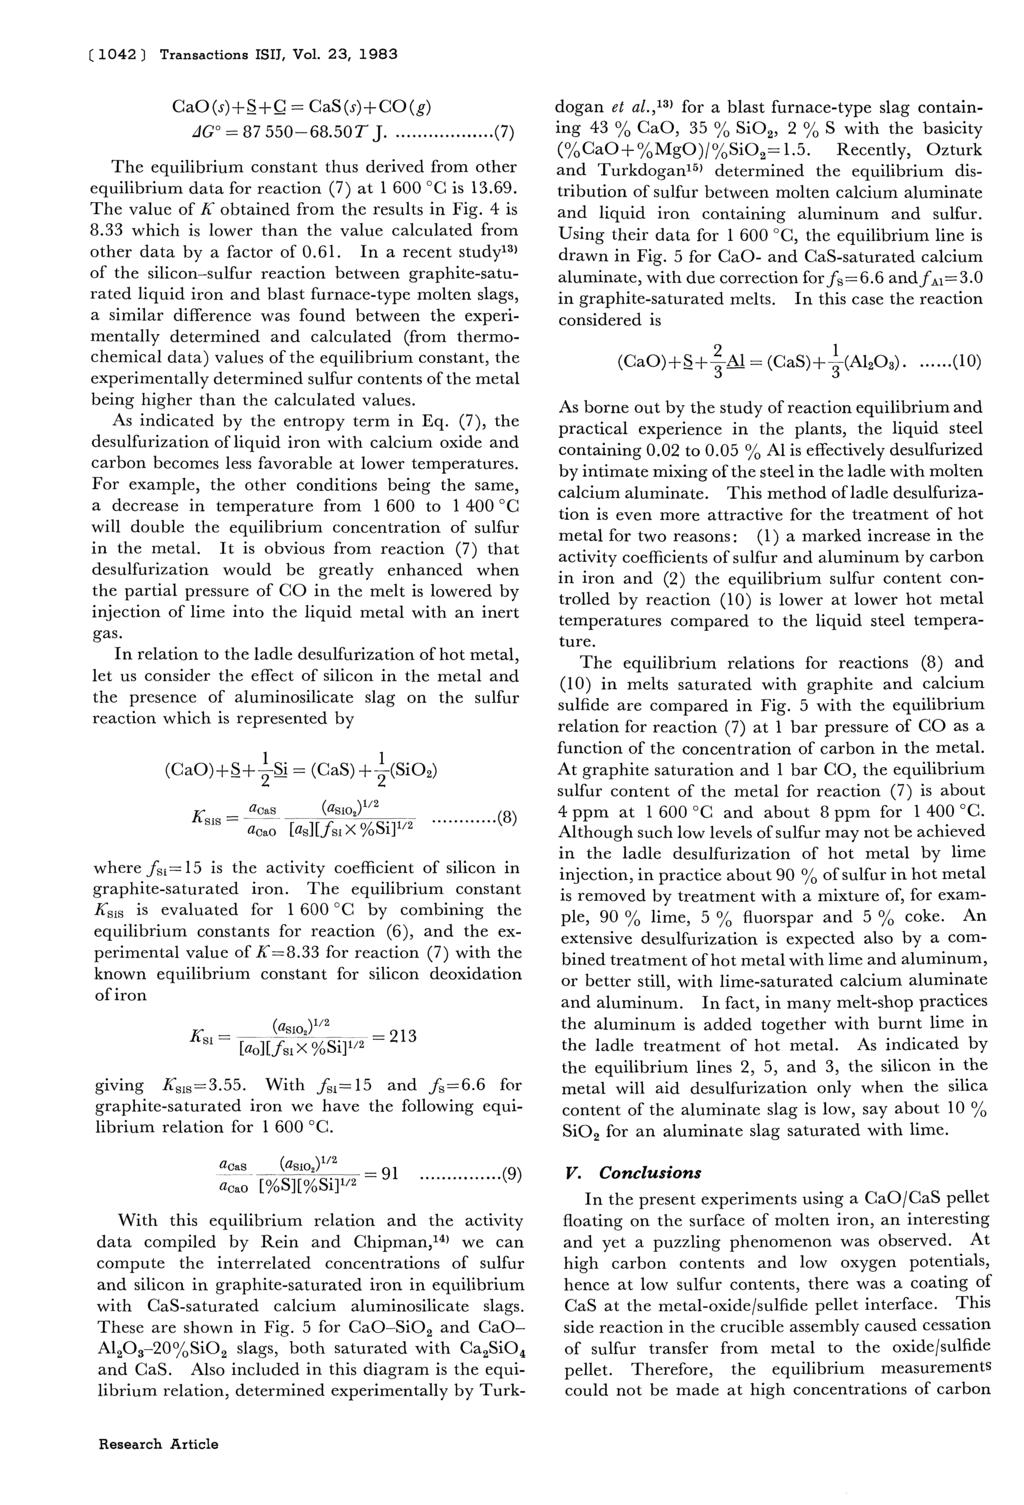 (1042) Transactions ISIJ, Vol. 23, 1983 CaO (s)+s +C = GaS (s)+ CO (g) dg = 87 550-68.50T J...(7) The equilibrium constant thus derived from other equilibrium data for reaction (7) at 1 600 C is 13.